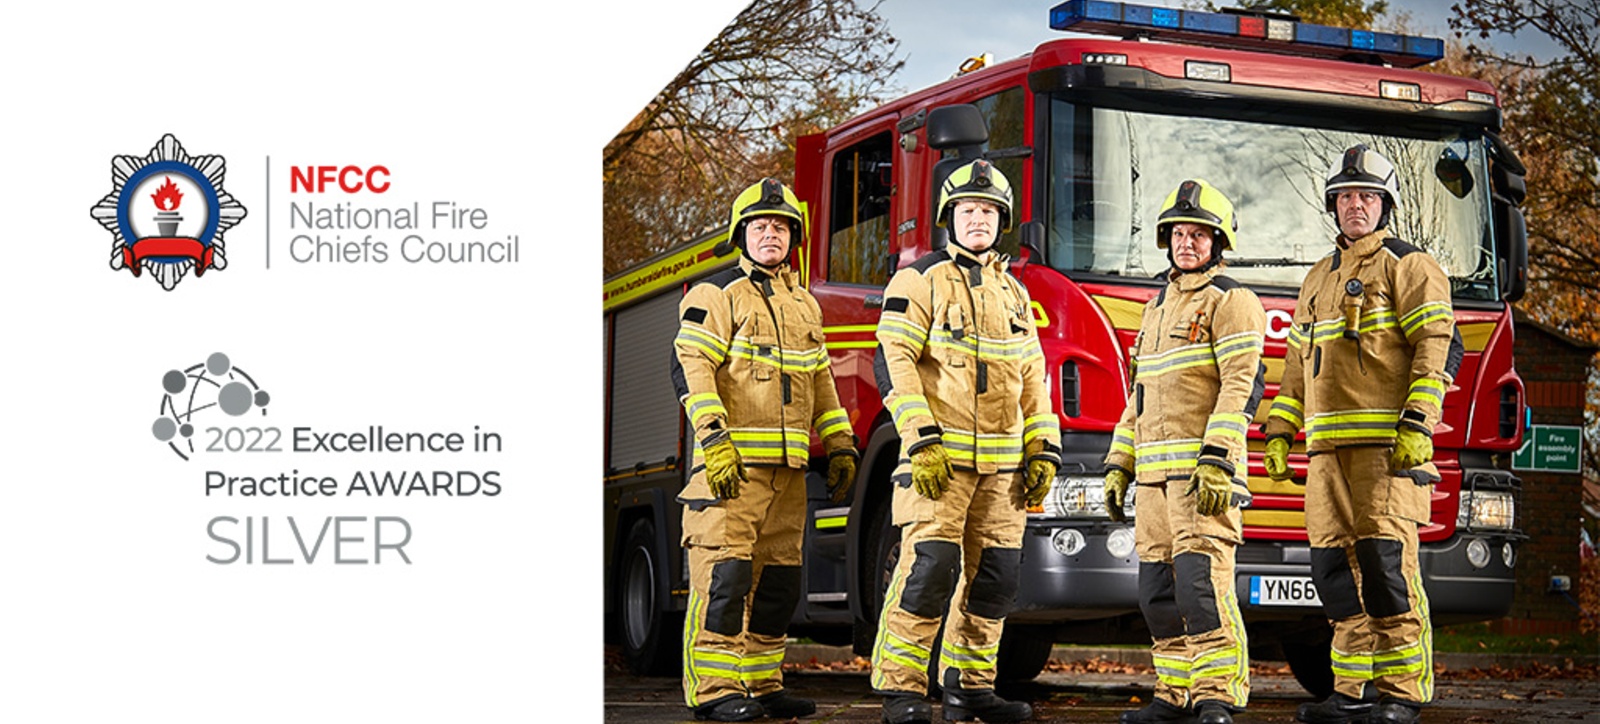 Firefighters with their engine, marking the fact that WBS won an EMFD award for its Executive Leadership Programme for the National Fire Chiefs Council.